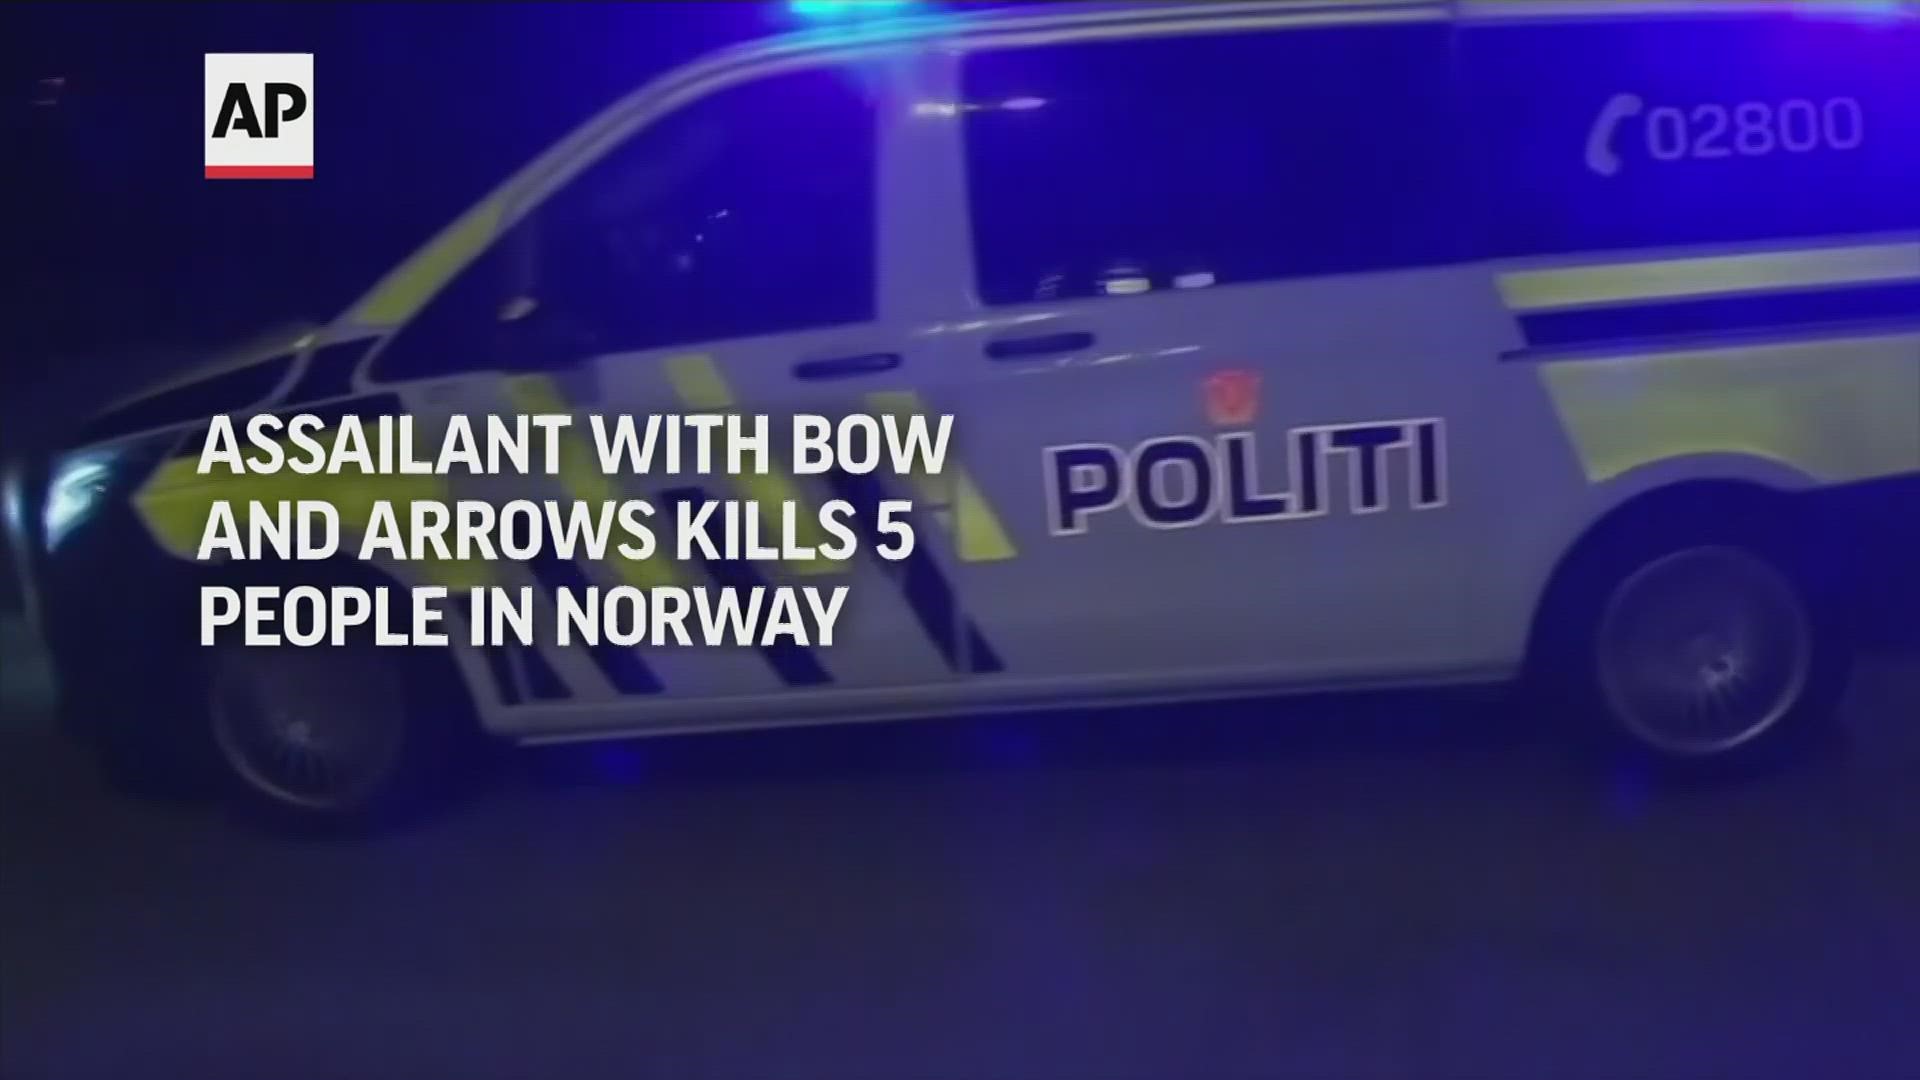 A man armed with a bow and arrows killed five people Wednesday near the Norwegian capital of Oslo before he was arrested, authorities said.